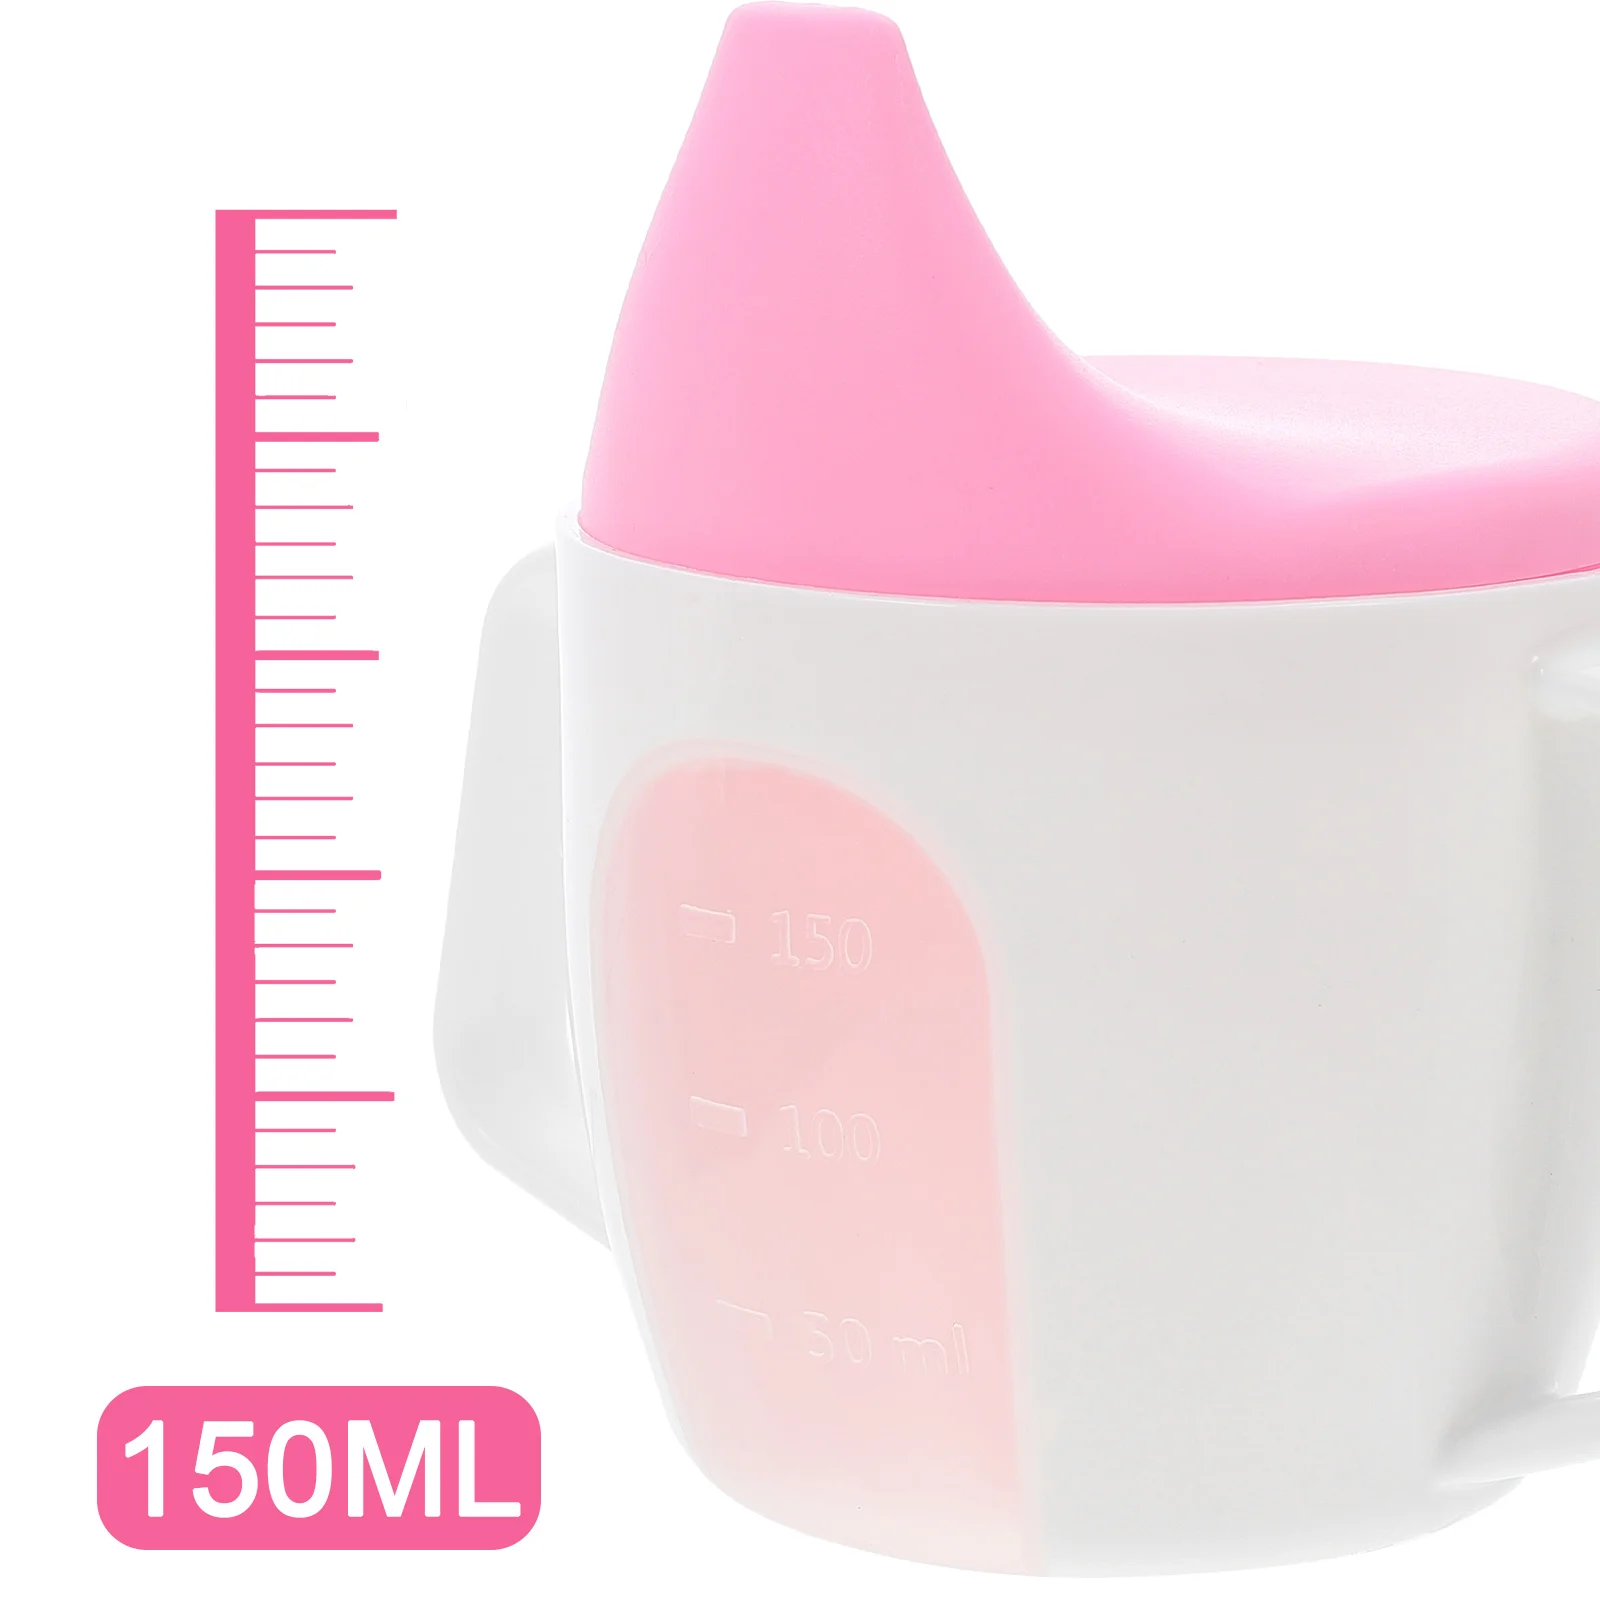 https://ae01.alicdn.com/kf/S2ff71dd58f77402ea8d9ec3f4987720cK/Newborn-Milk-Bottle-Sippy-Cup-Handle-Spill-Proof-Cups-Toddlers-Multi-function-Storage.jpg